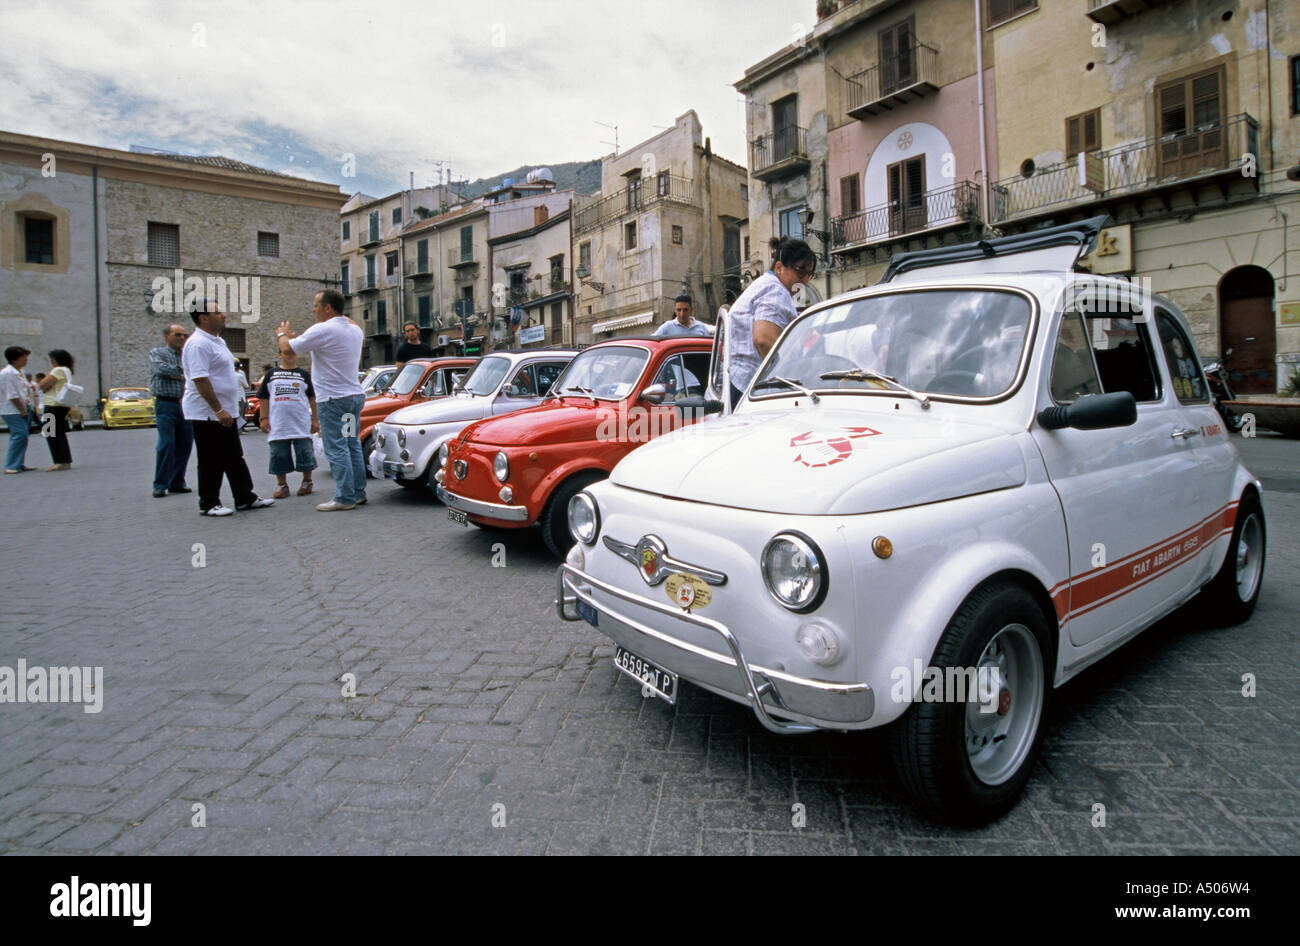 Italy, Palermo Province, Sicily, Monreale - Fiat 500 cars parked in front of  Monreale Cathedral during a Fiat 500 rally Stock Photo